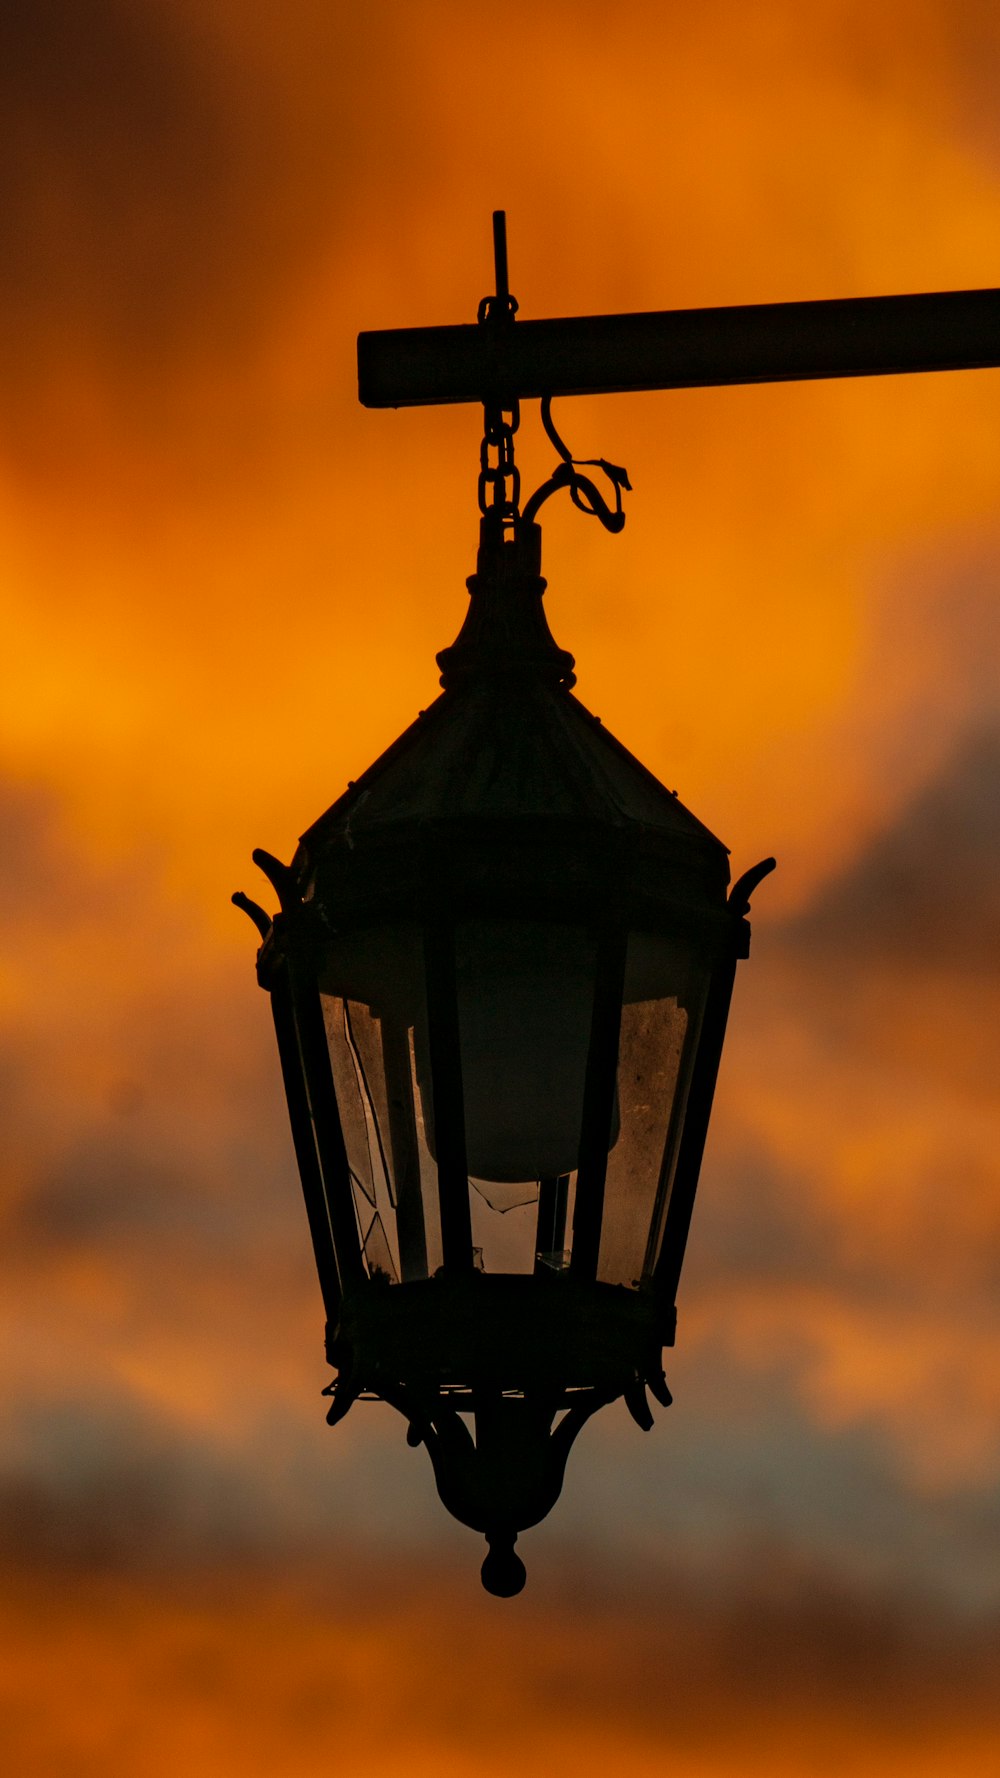 a silhouette of a bell